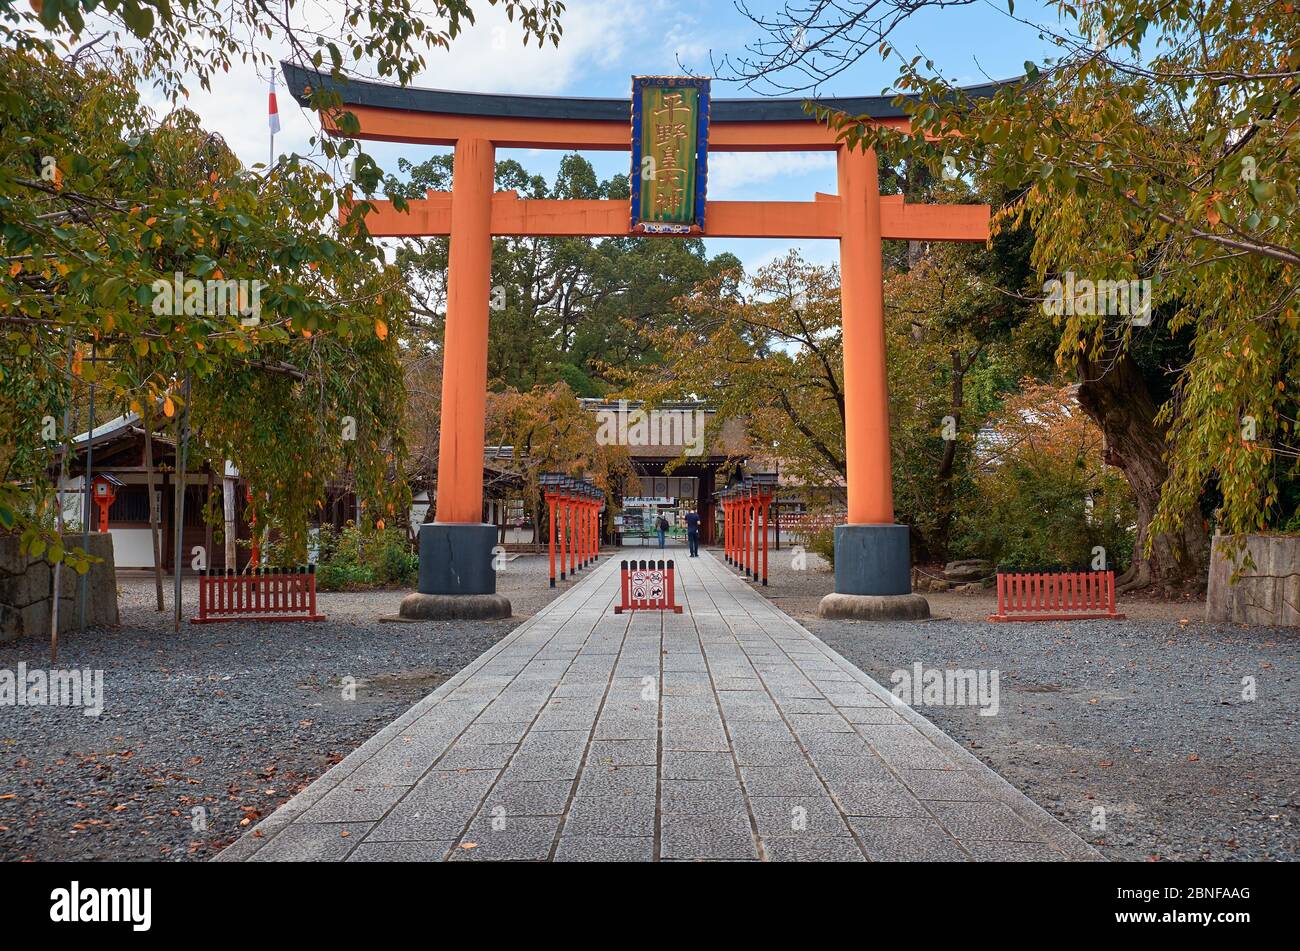 KYOTO, JAPAN - OCTOBER 17, 2019: The red torii gate on the sando, the road approaching the Hirano Shrine.  Kyoto. Japan Stock Photo